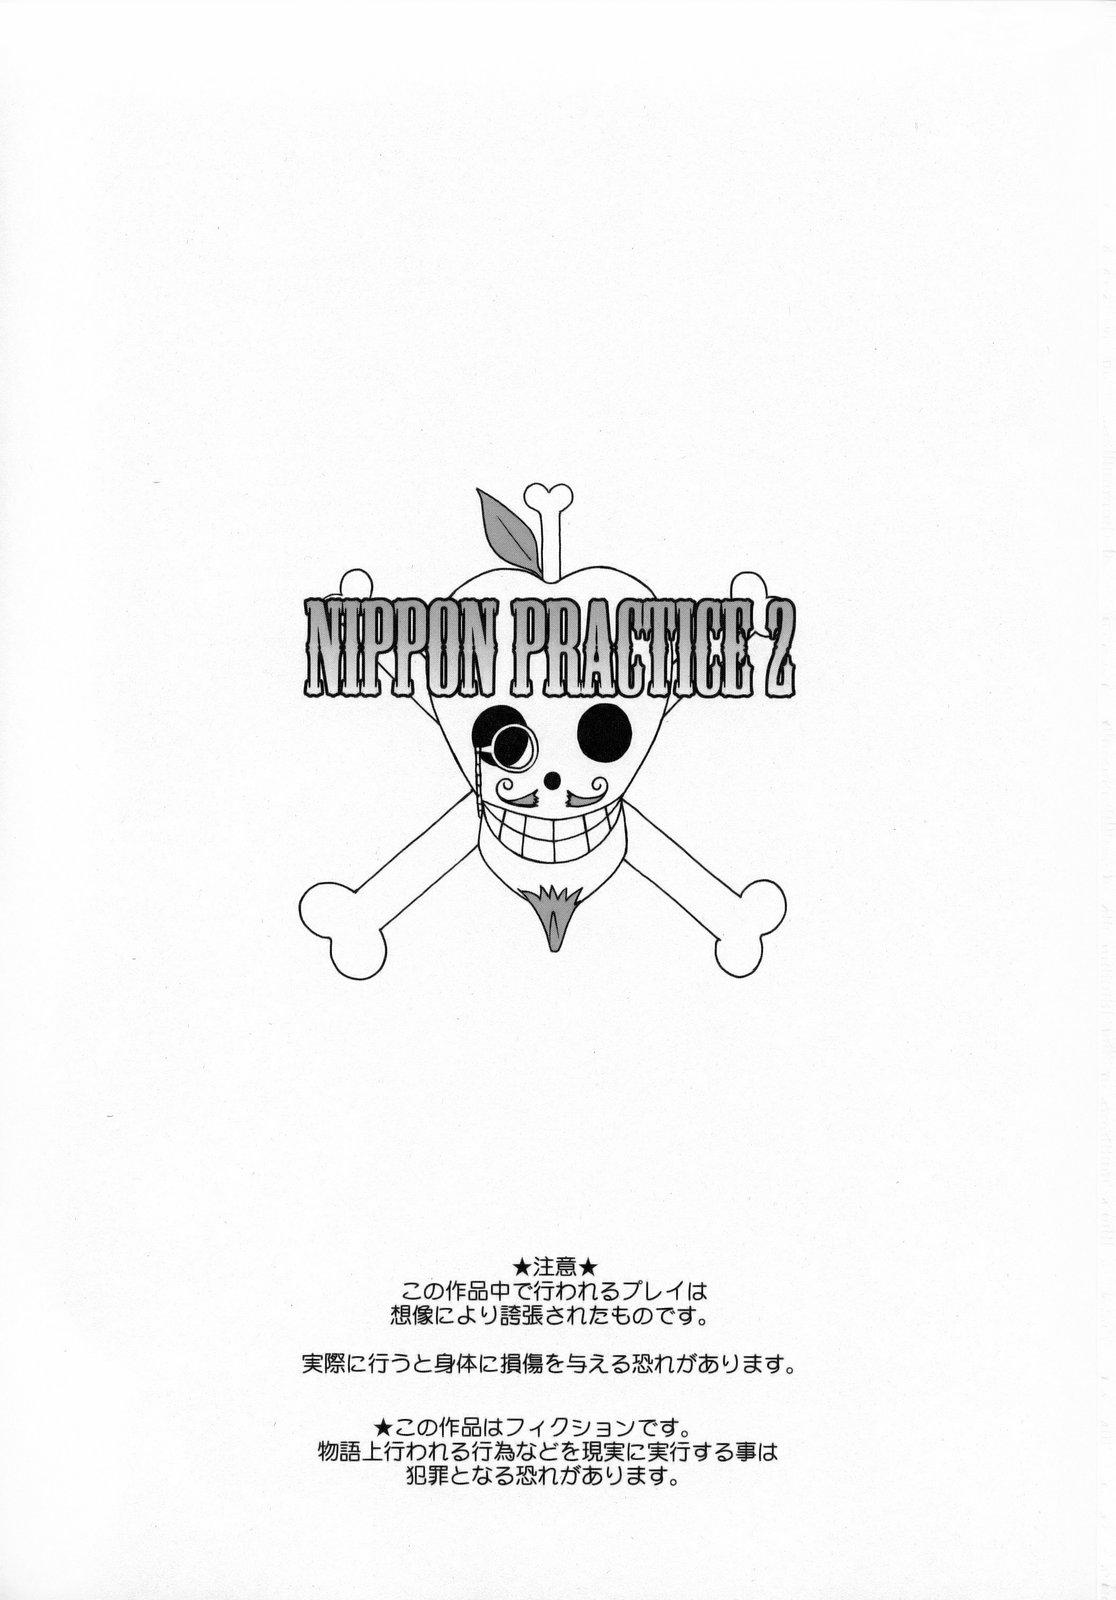 Pegging Nippon Practice 2 - One piece Doctor - Page 2